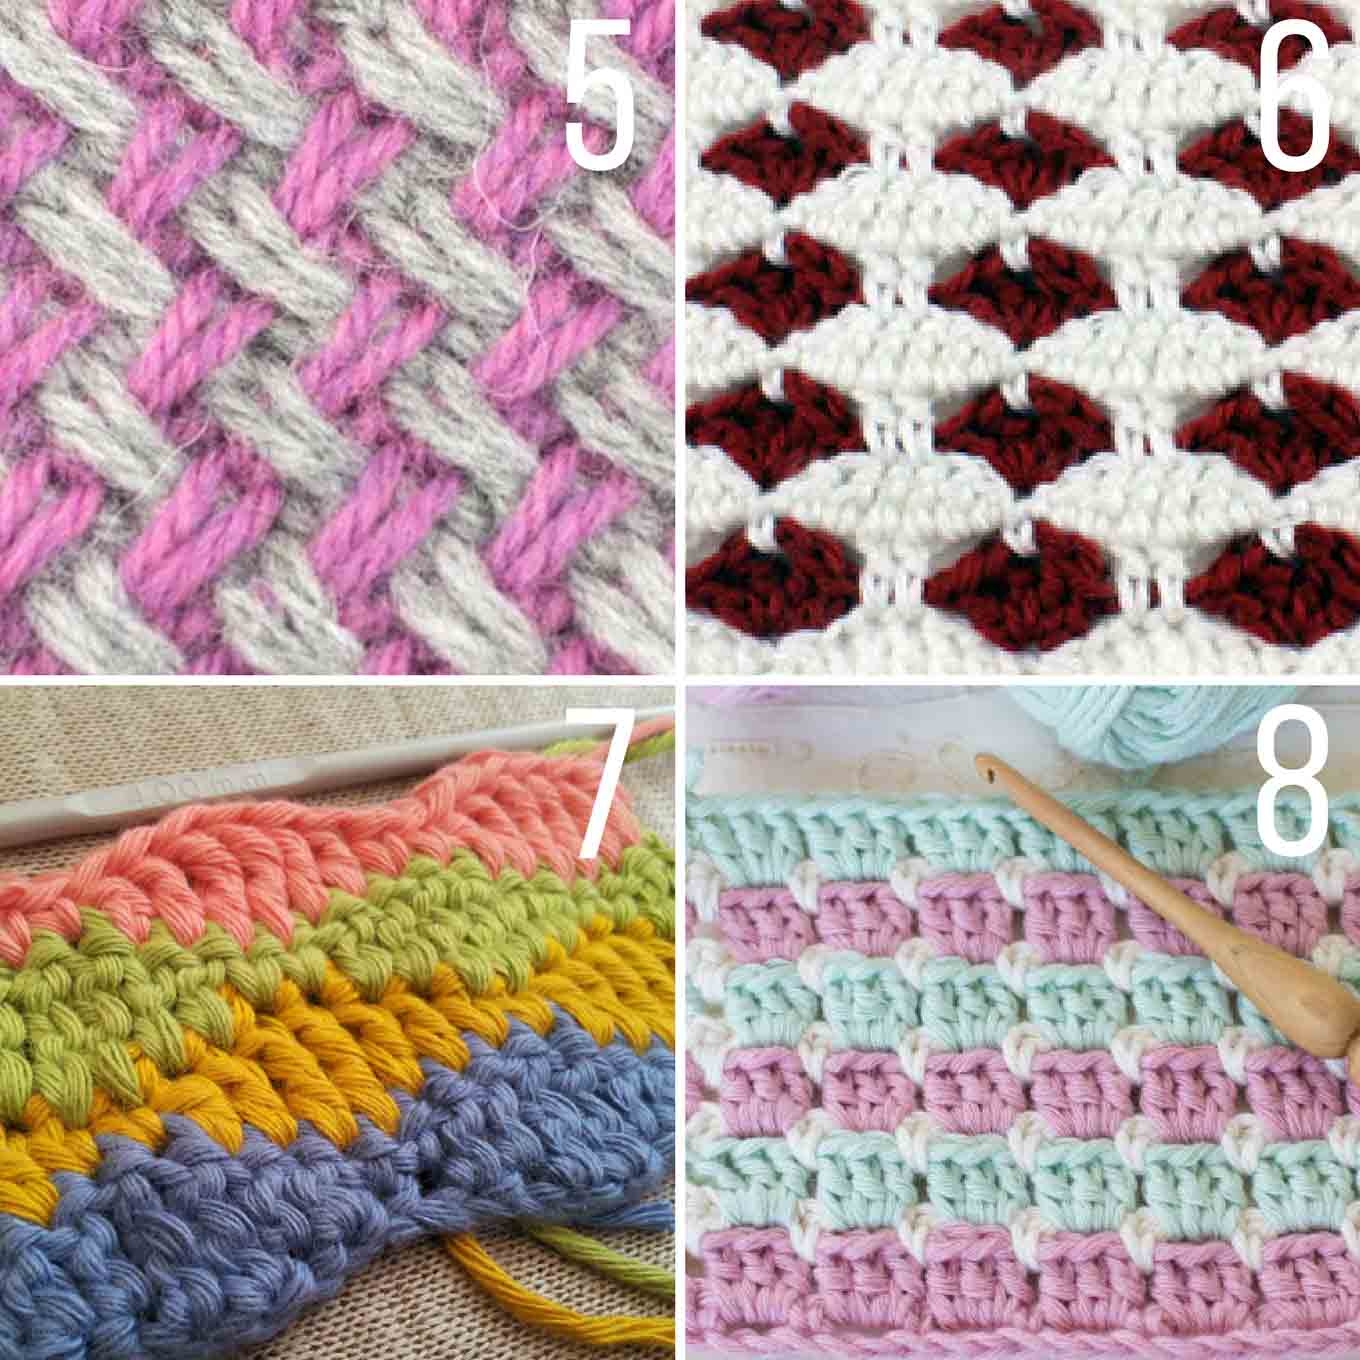 Each of these stitch tutorials is made using multiple colors of yarn to create stunning effects! This crochet stitches list has something for everyone--beginner to advanced.